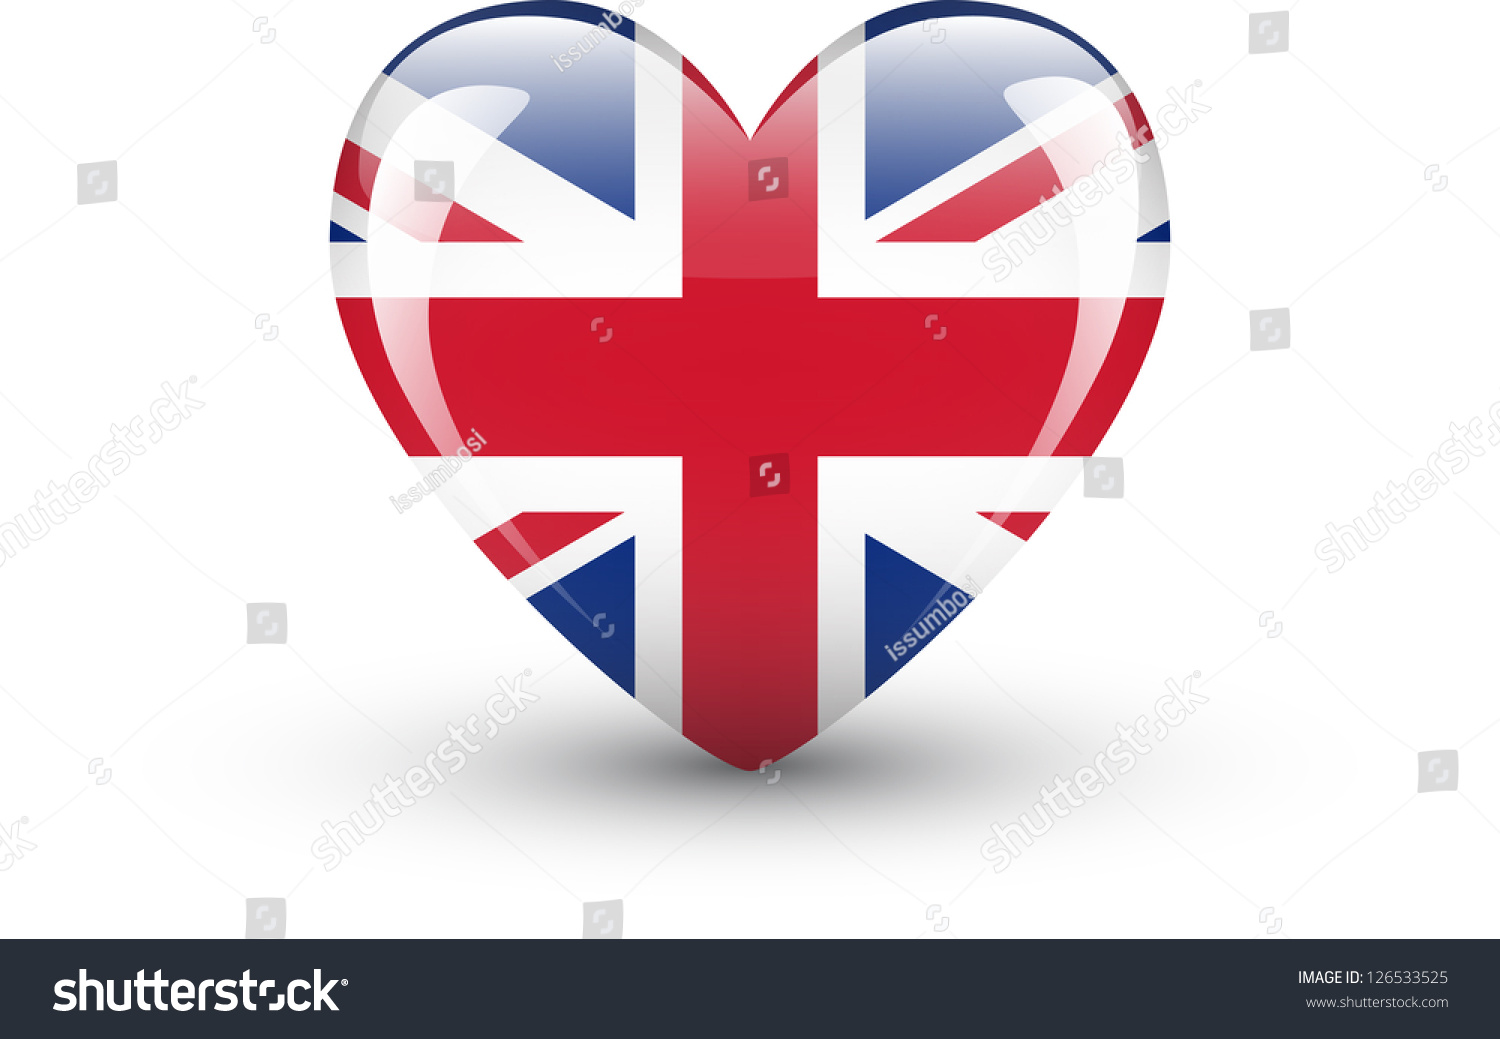 SVG of Heart-shaped icon with national flag of the UK isolated on white background svg